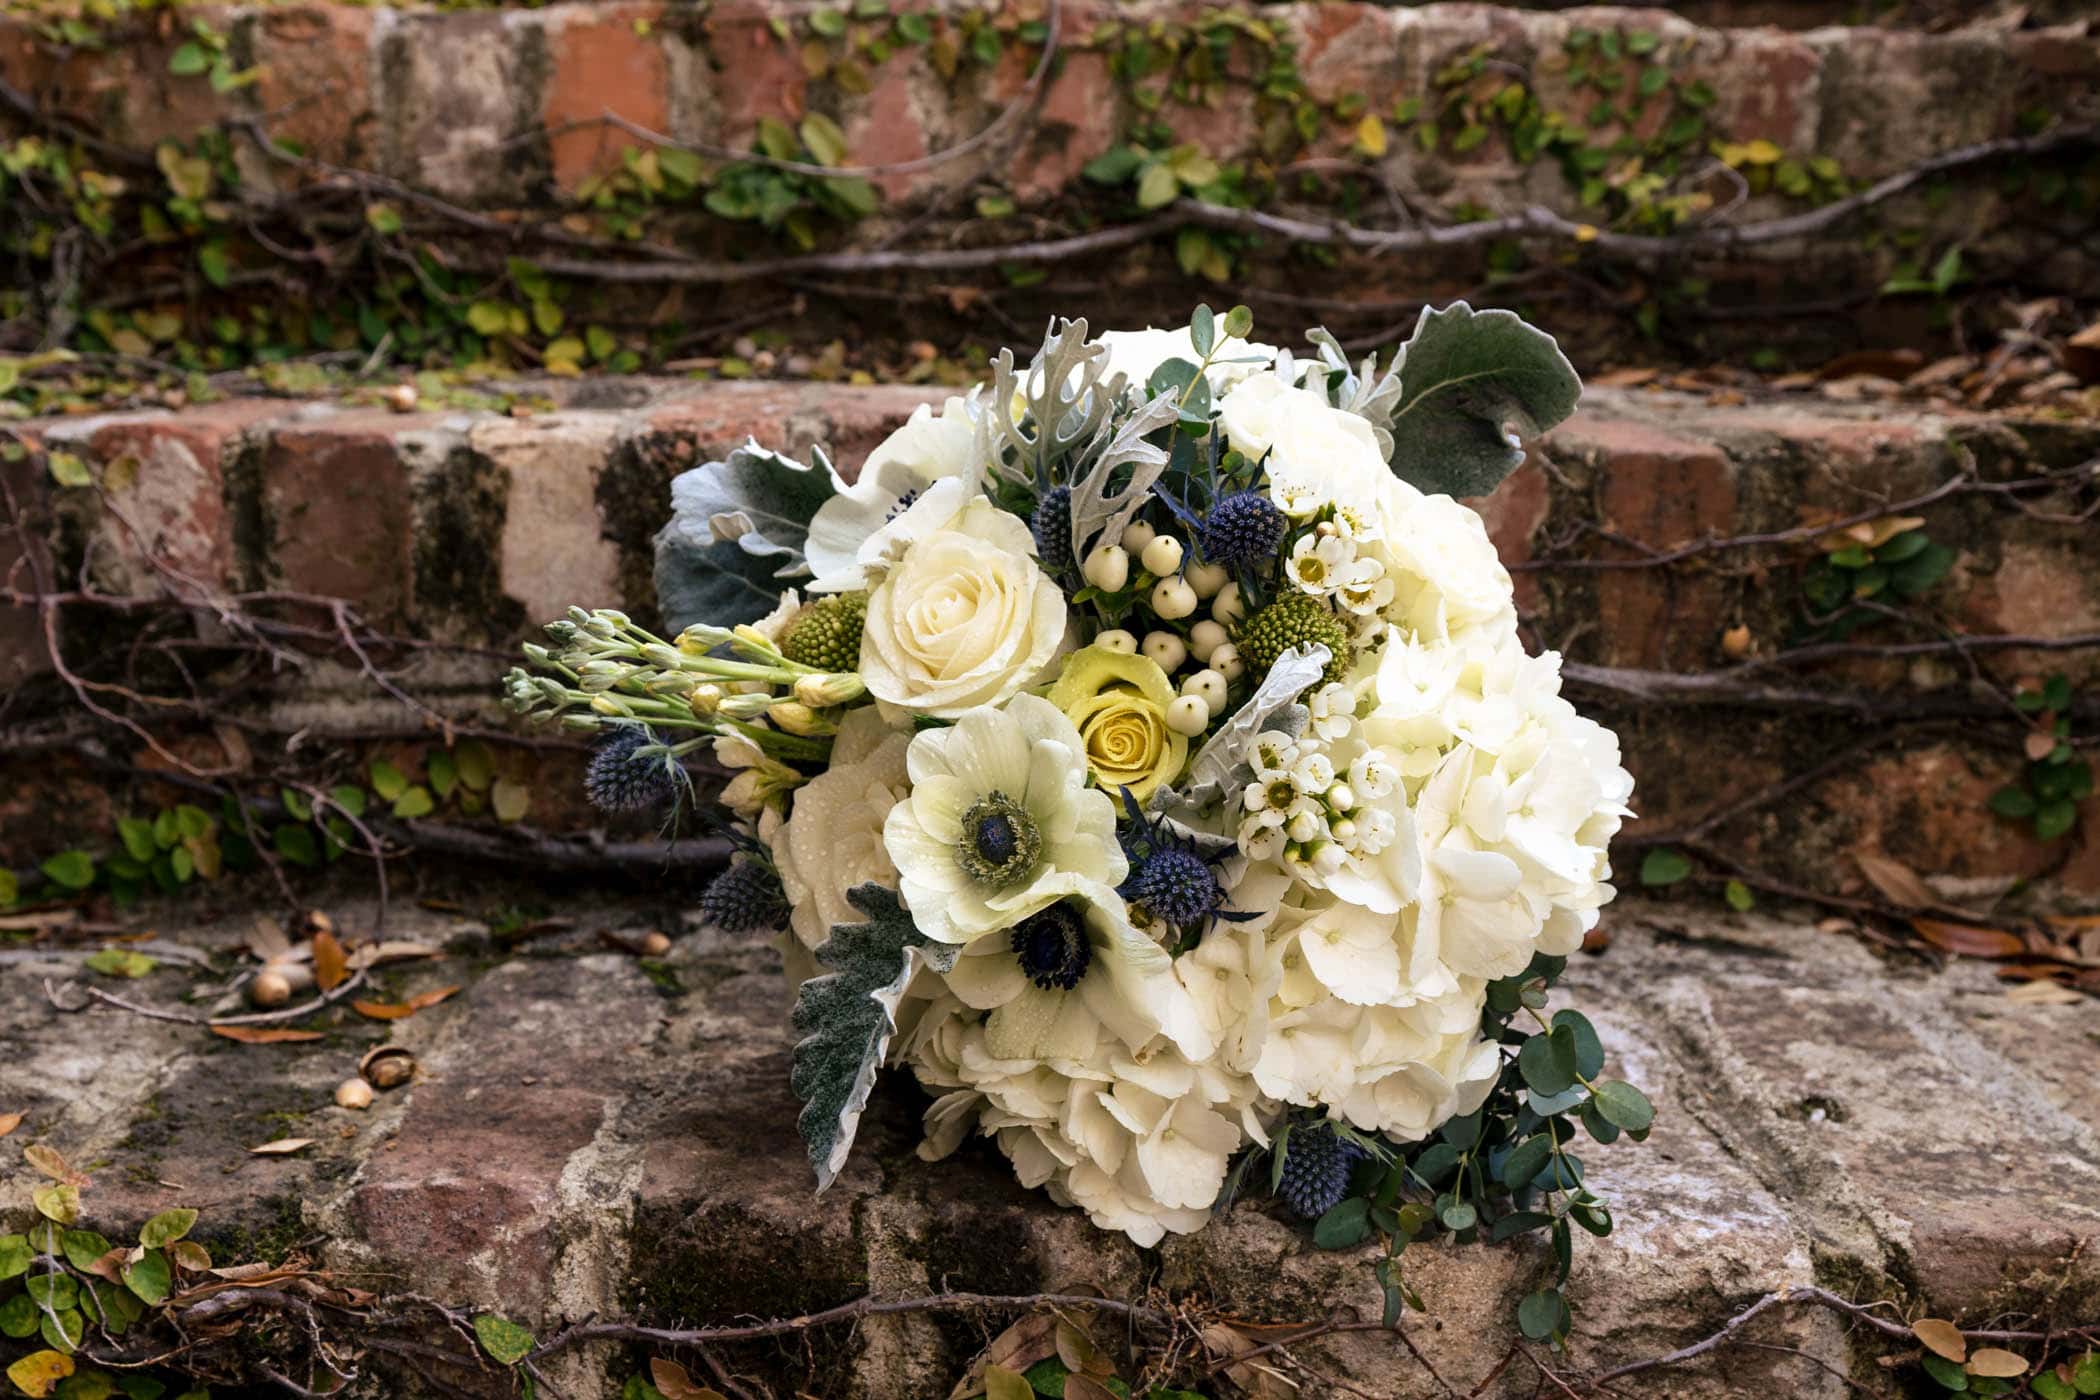 Brides bouquet by Farm City Flowers at the Beaufort Inn By Wedding photographer Susan DeLoach Photography